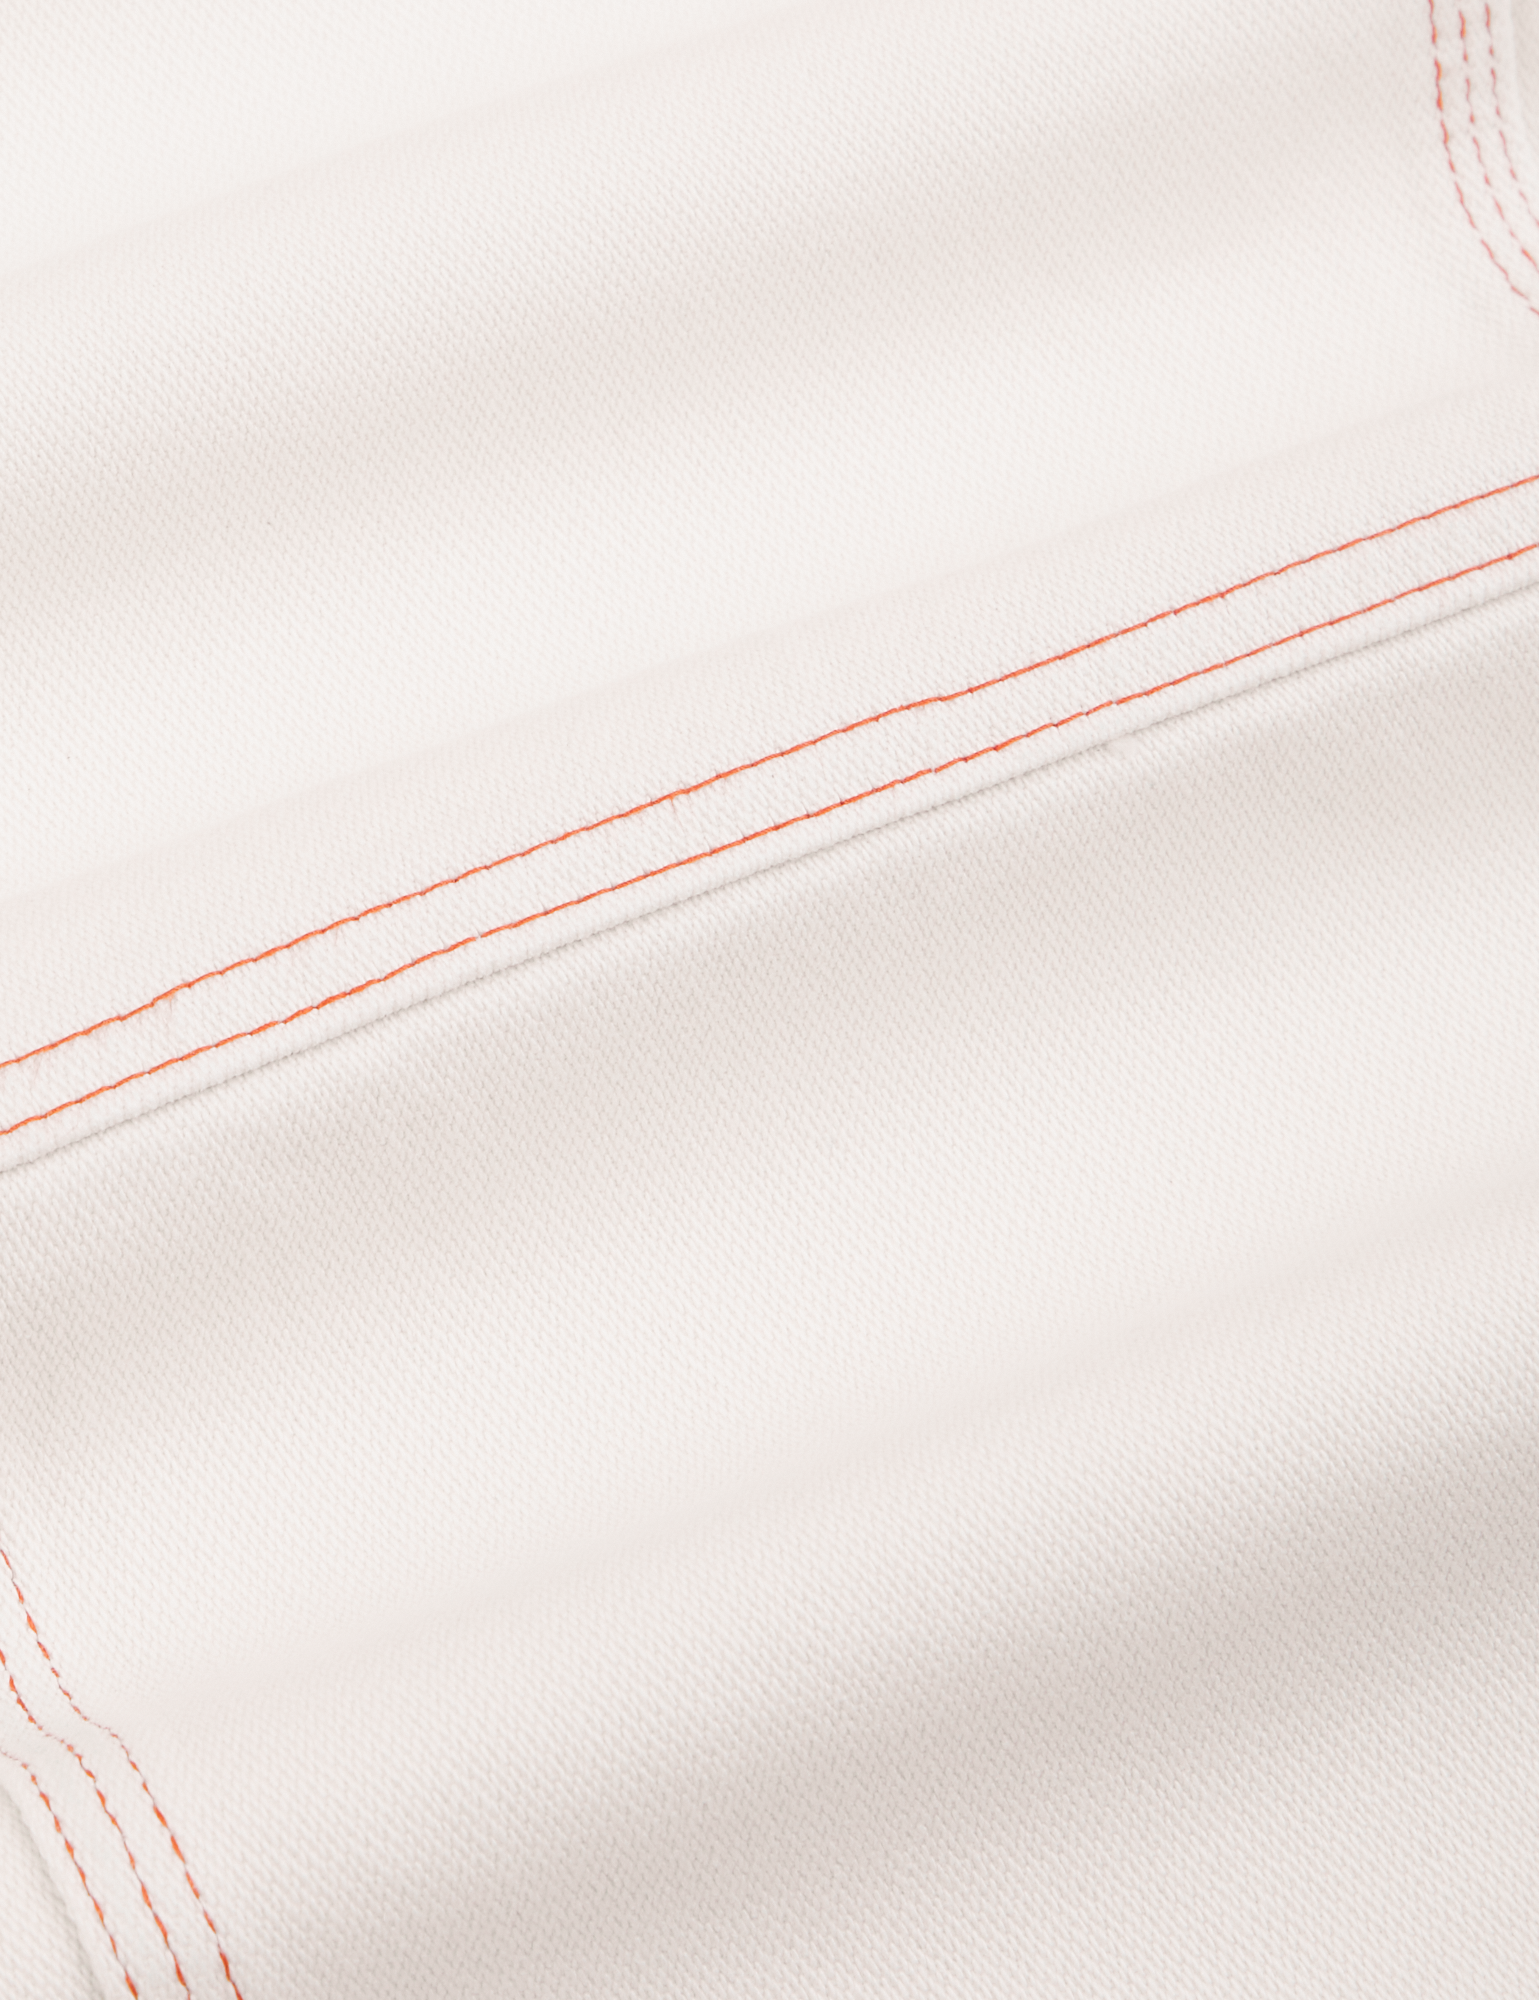 Carpenter Jeans in Vintage Tee Off-White fabric detail close up. Contrast orange stitching.